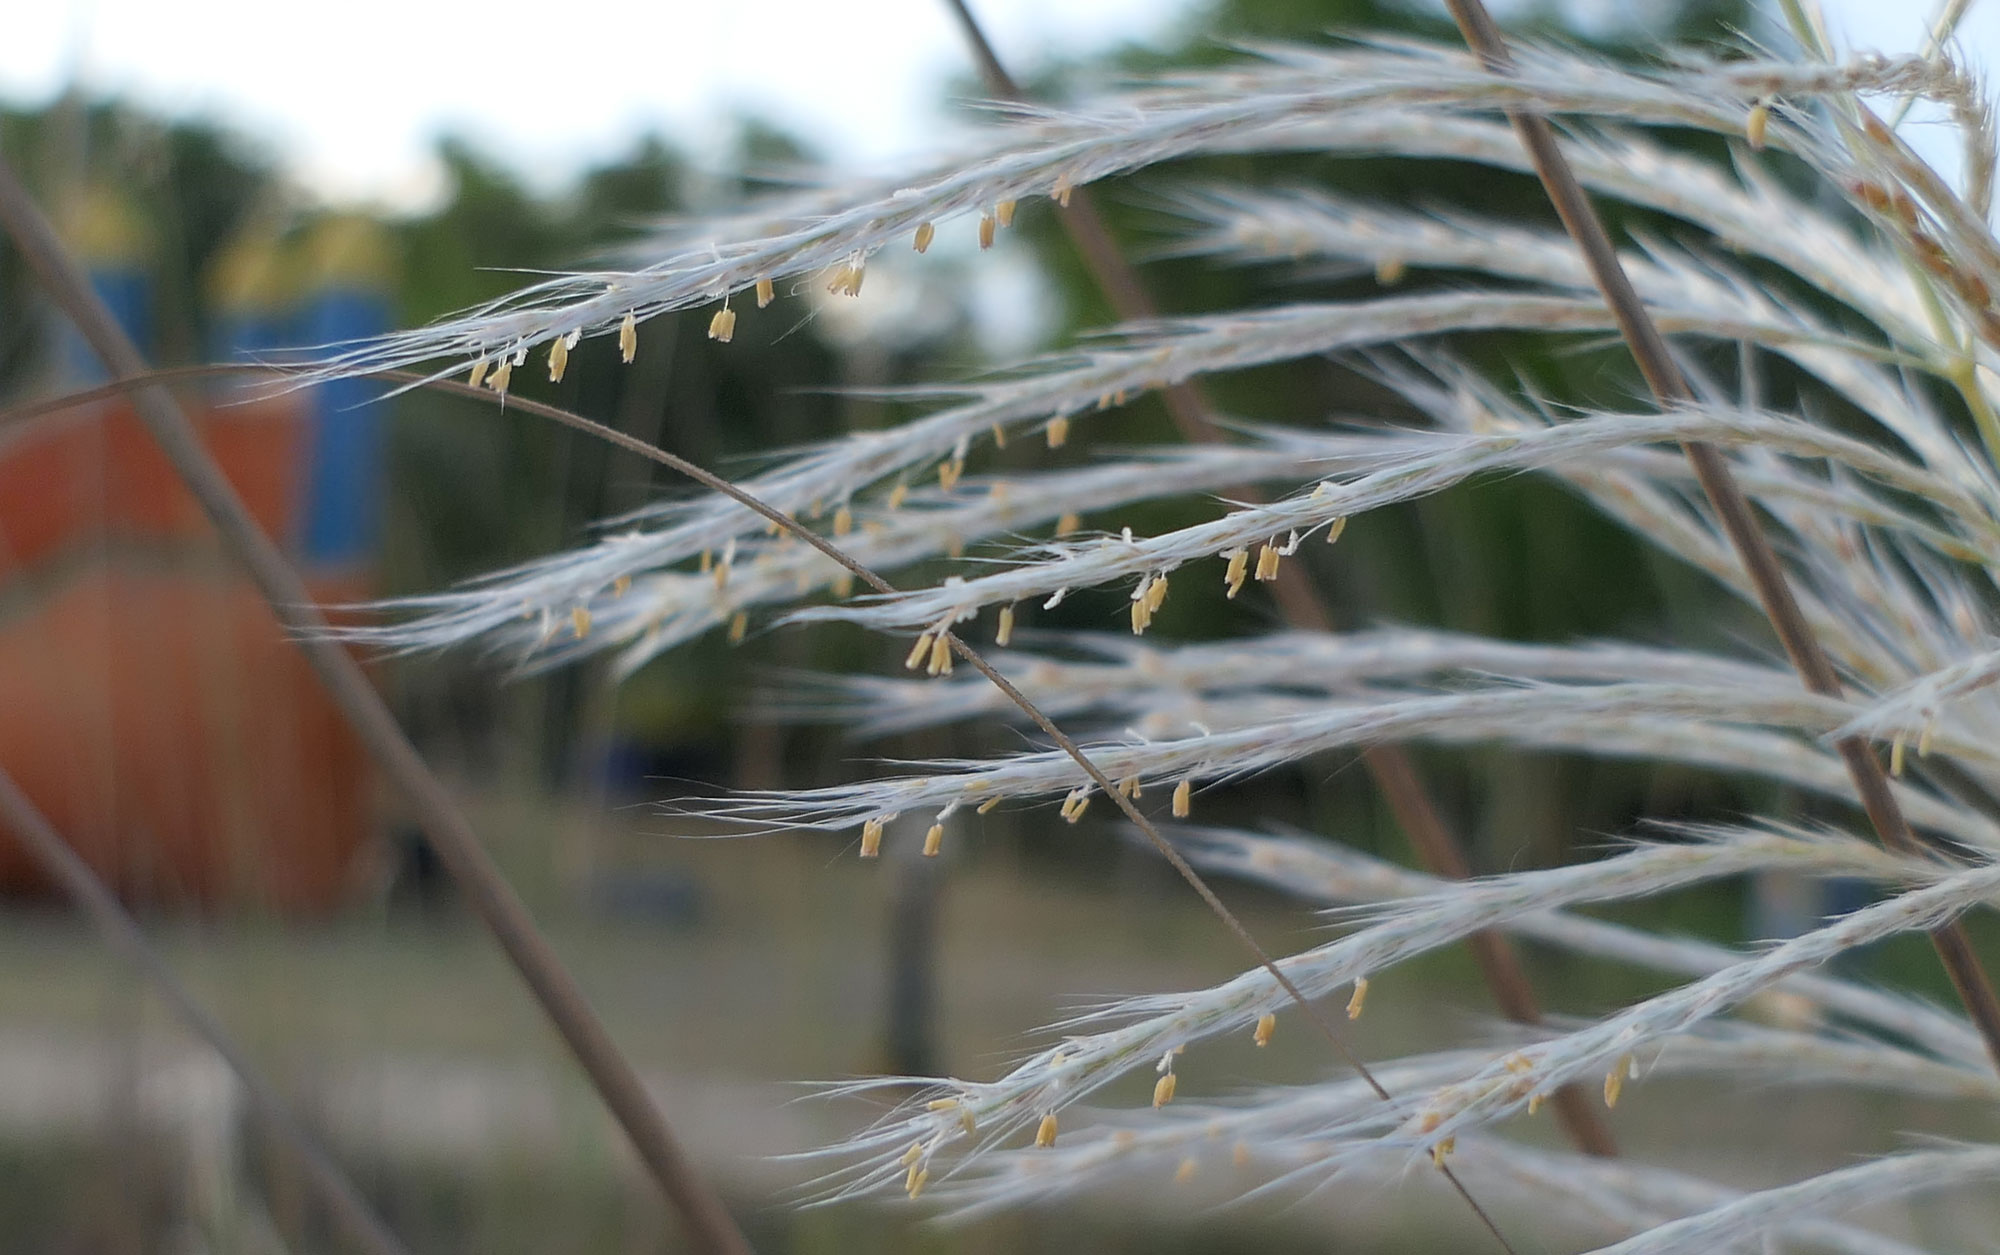 Photograph of part of a wild sugarcane inflorescence. The photo shows the tips of multiple delicate branches with feathery white hairs. Yellowish stamens dangle from the branches.